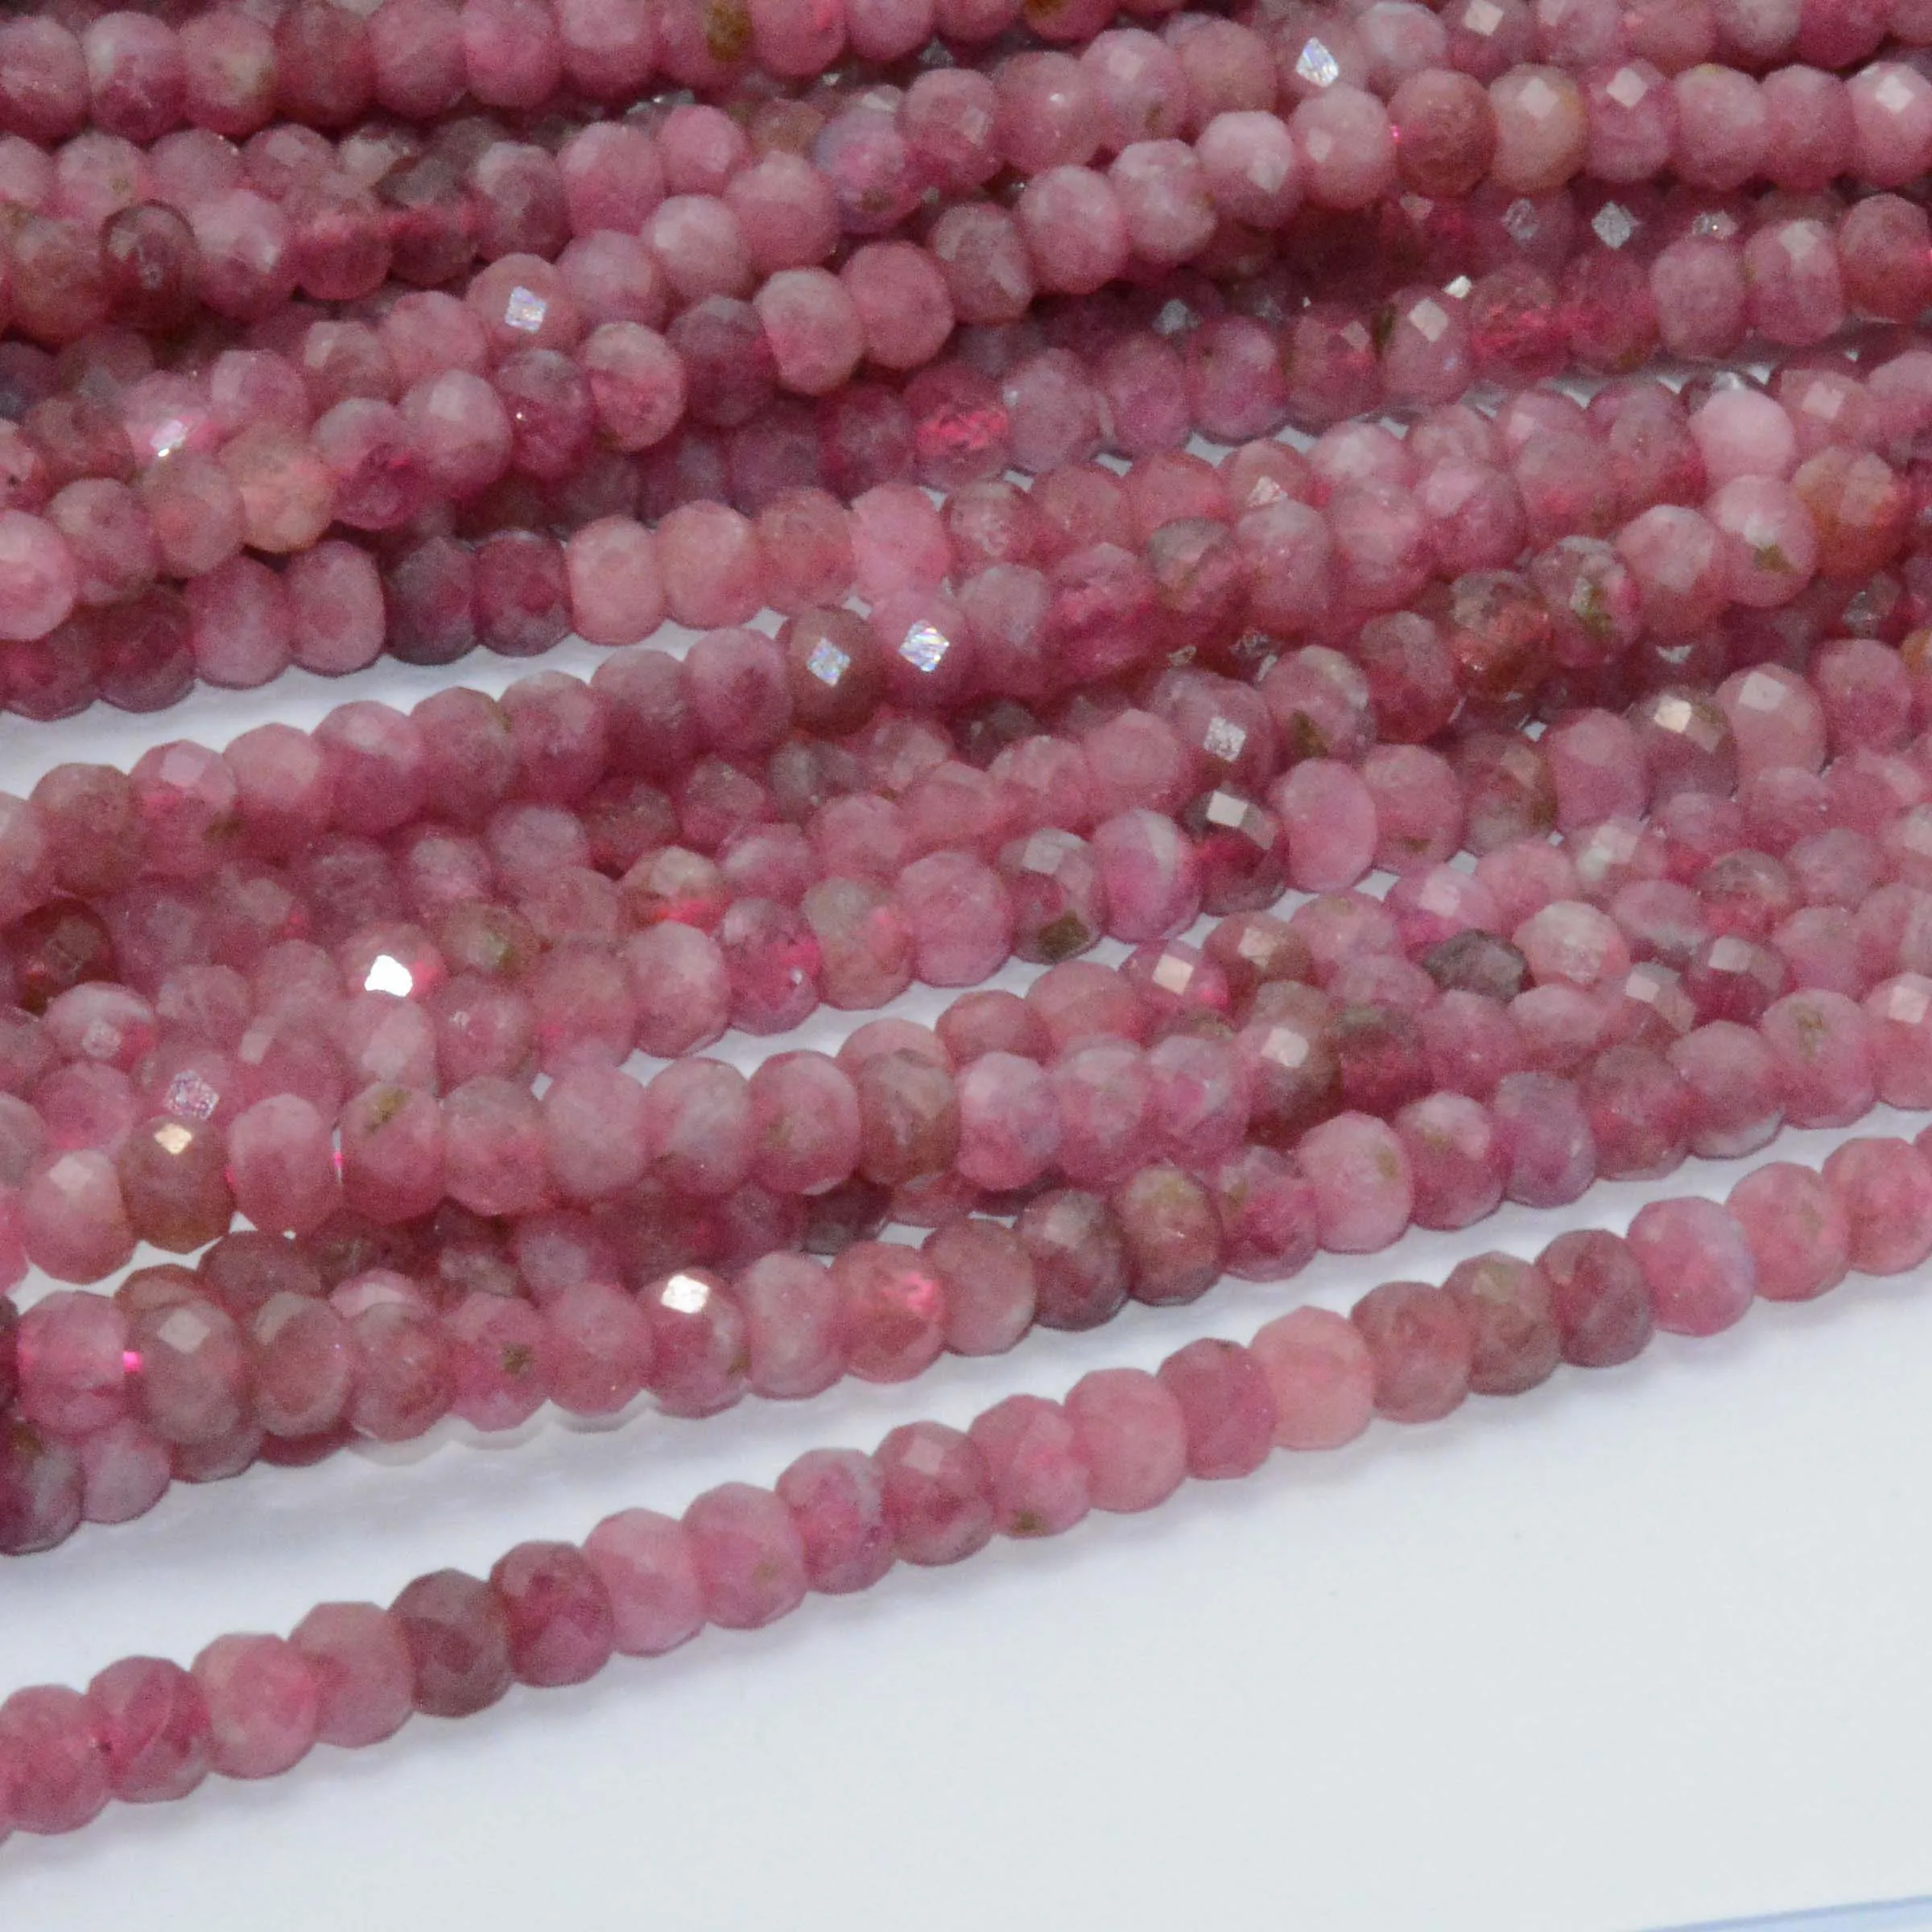 Multi Tourmaline Gemstone 3-4mm Rondelle Faceted Loose Beads 12.5" 1-10 Strand 